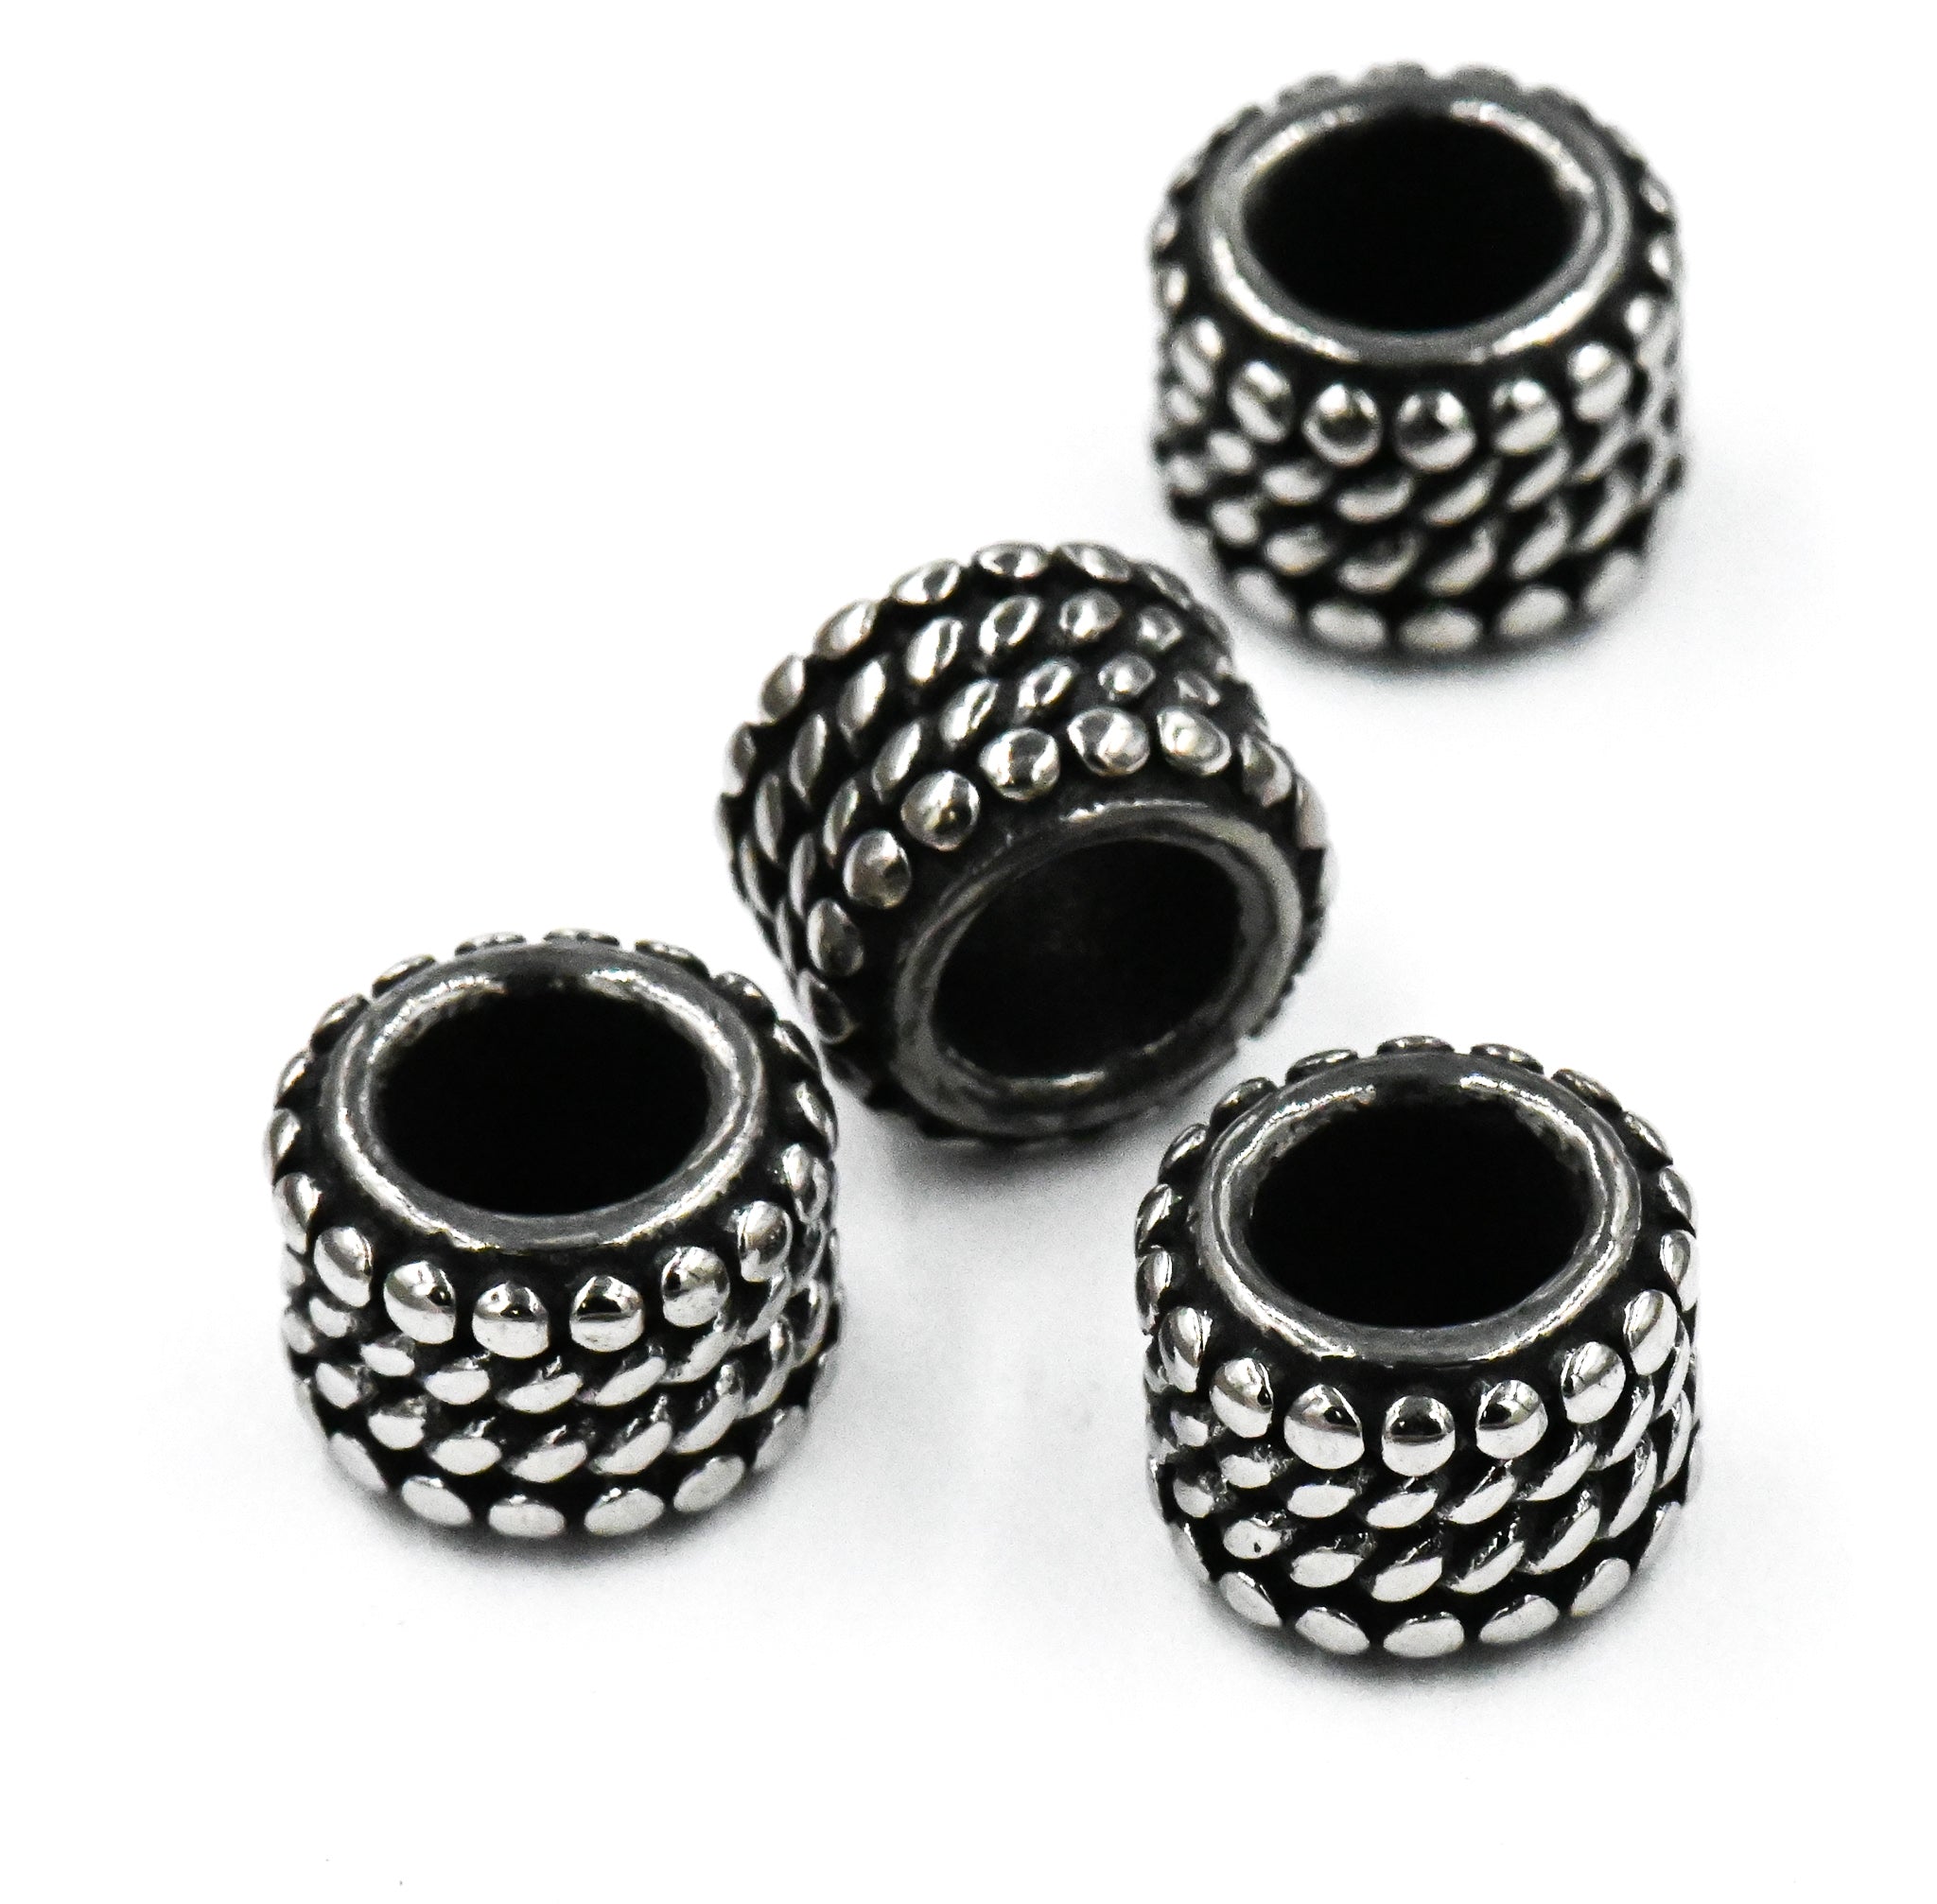 Stainless Steel Beads, 1pc, Bead Pattern Large Hole Beads, 9mm Antique Silver